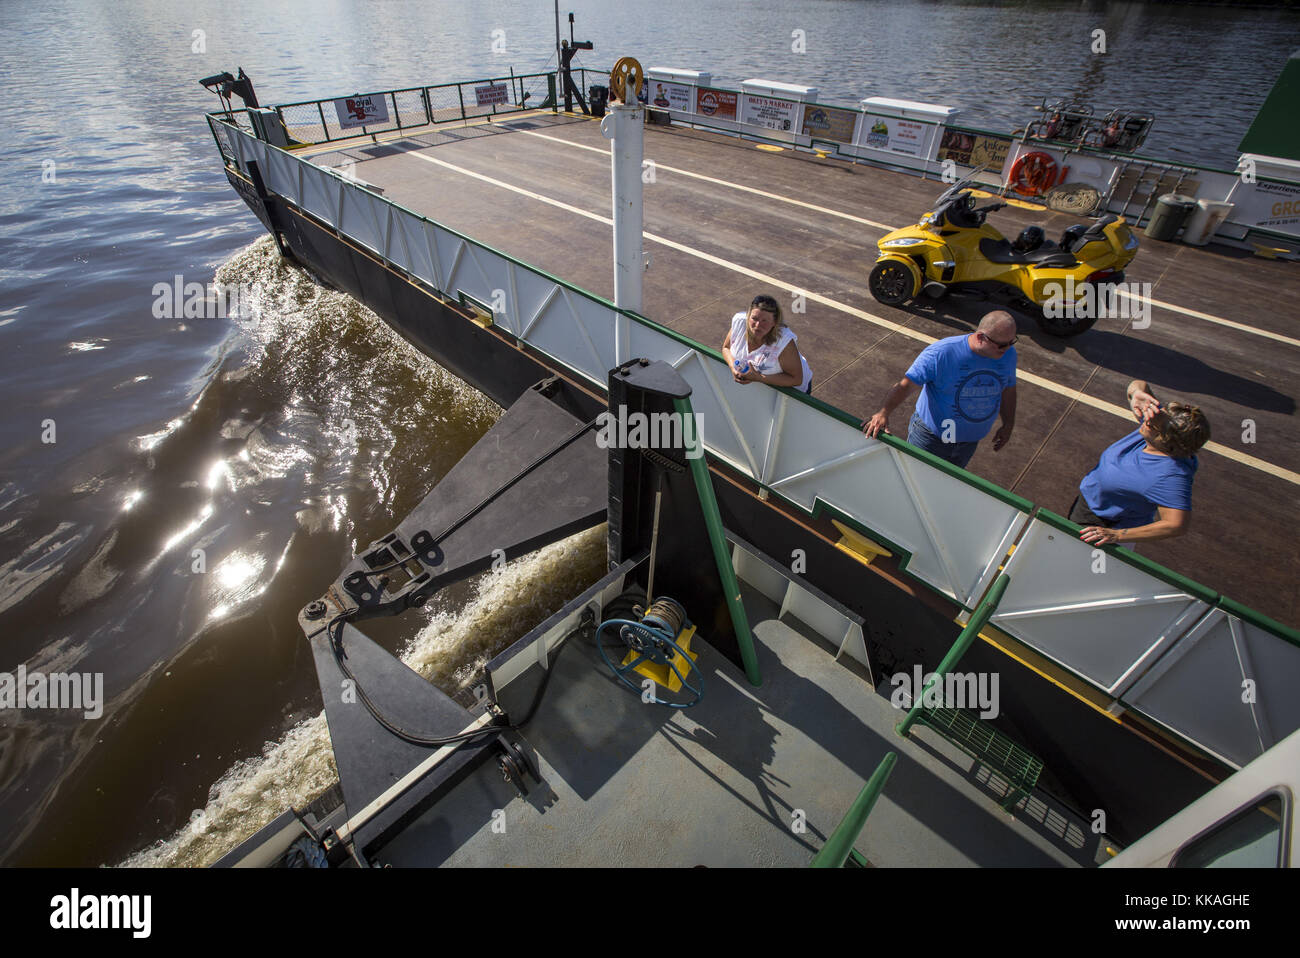 Cassville, Iowa, USA. 15th June, 2017. Guests are seen talking with Deckhand Lori Nemitz, right, during their ride on the Pride of Cassville Car Ferry on the Mississippi River on Thursday, June 15, 2017. The ferry is the oldest operating car ferry in Wisconsin, serving the area as early as 1833. It connects the Great River Road and the Iowa Great River Road with a 10-15 minute ride operating from early May to late October. Credit: Andy Abeyta, Quad-City Times/Quad-City Times/ZUMA Wire/Alamy Live News Stock Photo